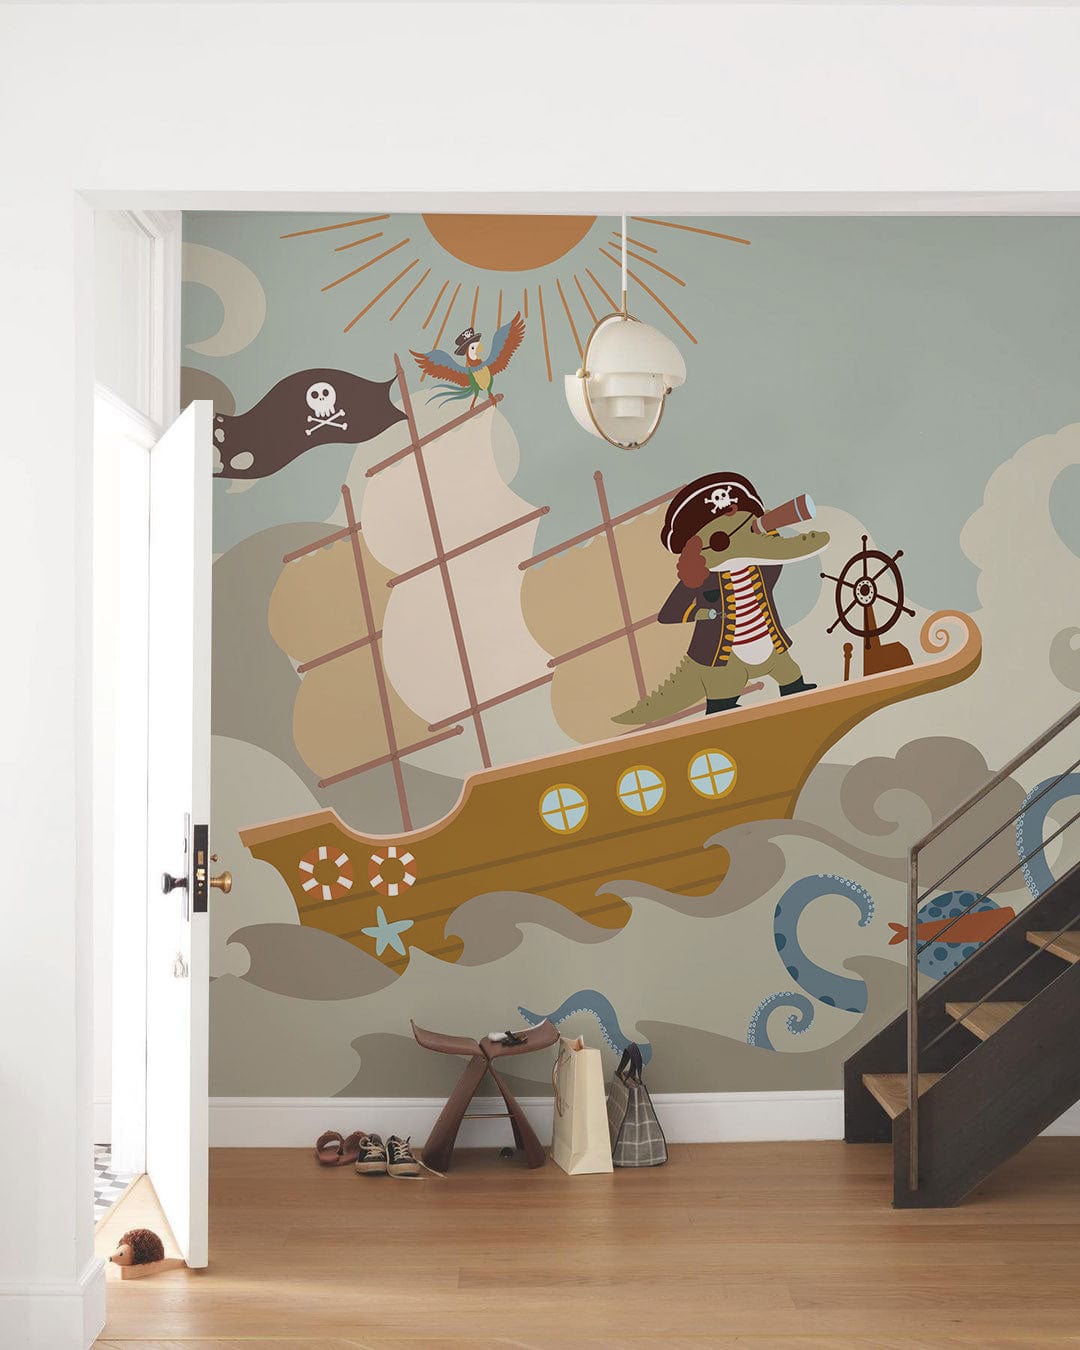 Cartoon Mural Wallpaper with Pirate on Ocean Scene for Hallway Decoration